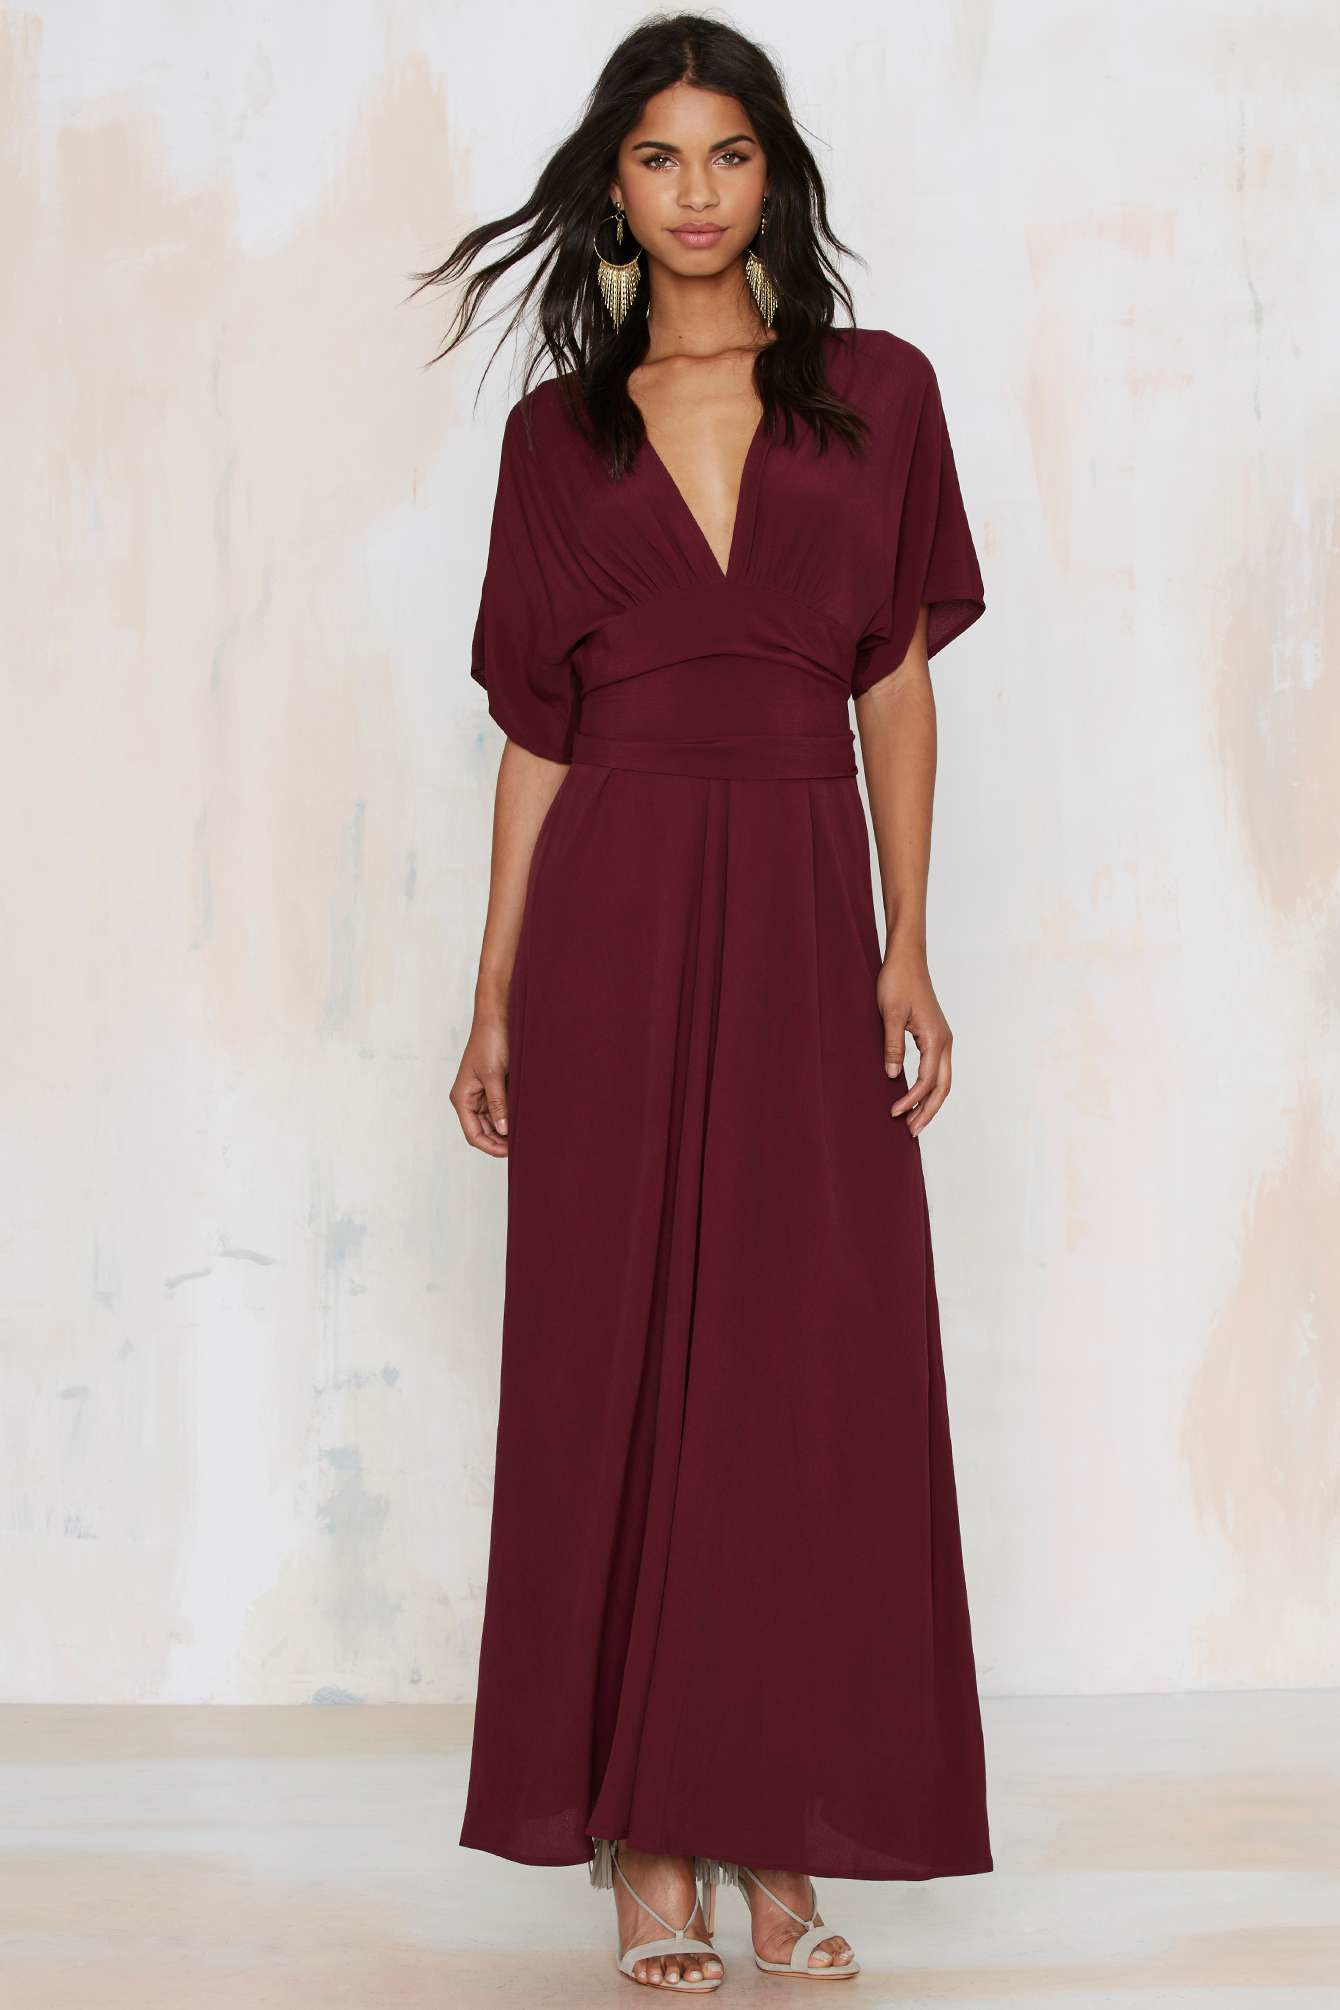 Lyst - Nasty Gal Classy To The Maxi Dress in Red